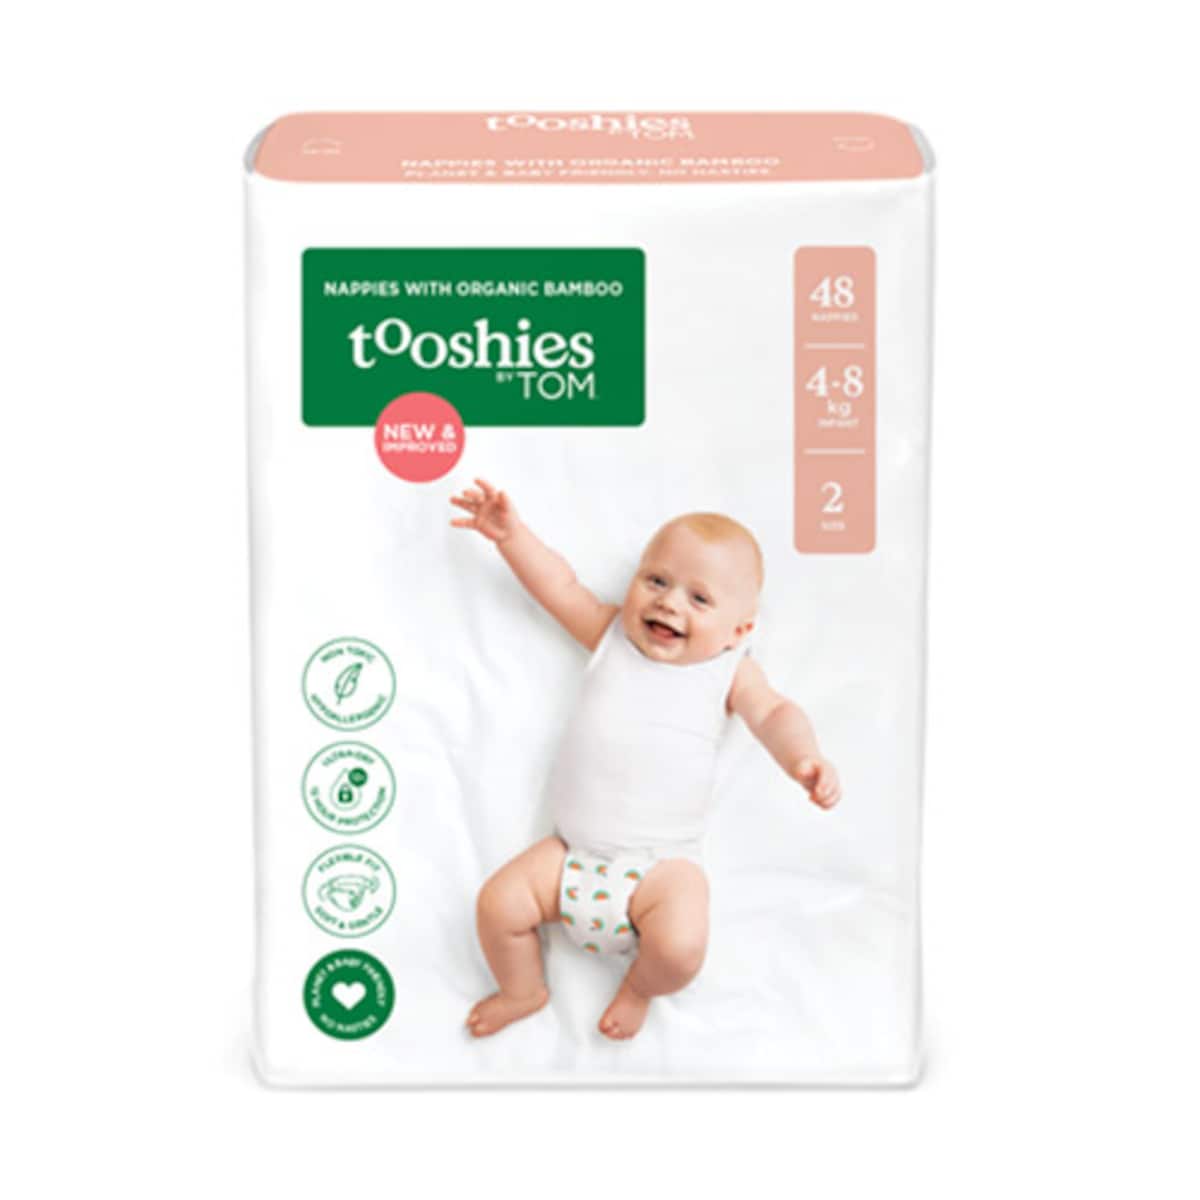 Tooshies by Tom Nappies Size 2 - Infant (4-8kg) 48 Pack